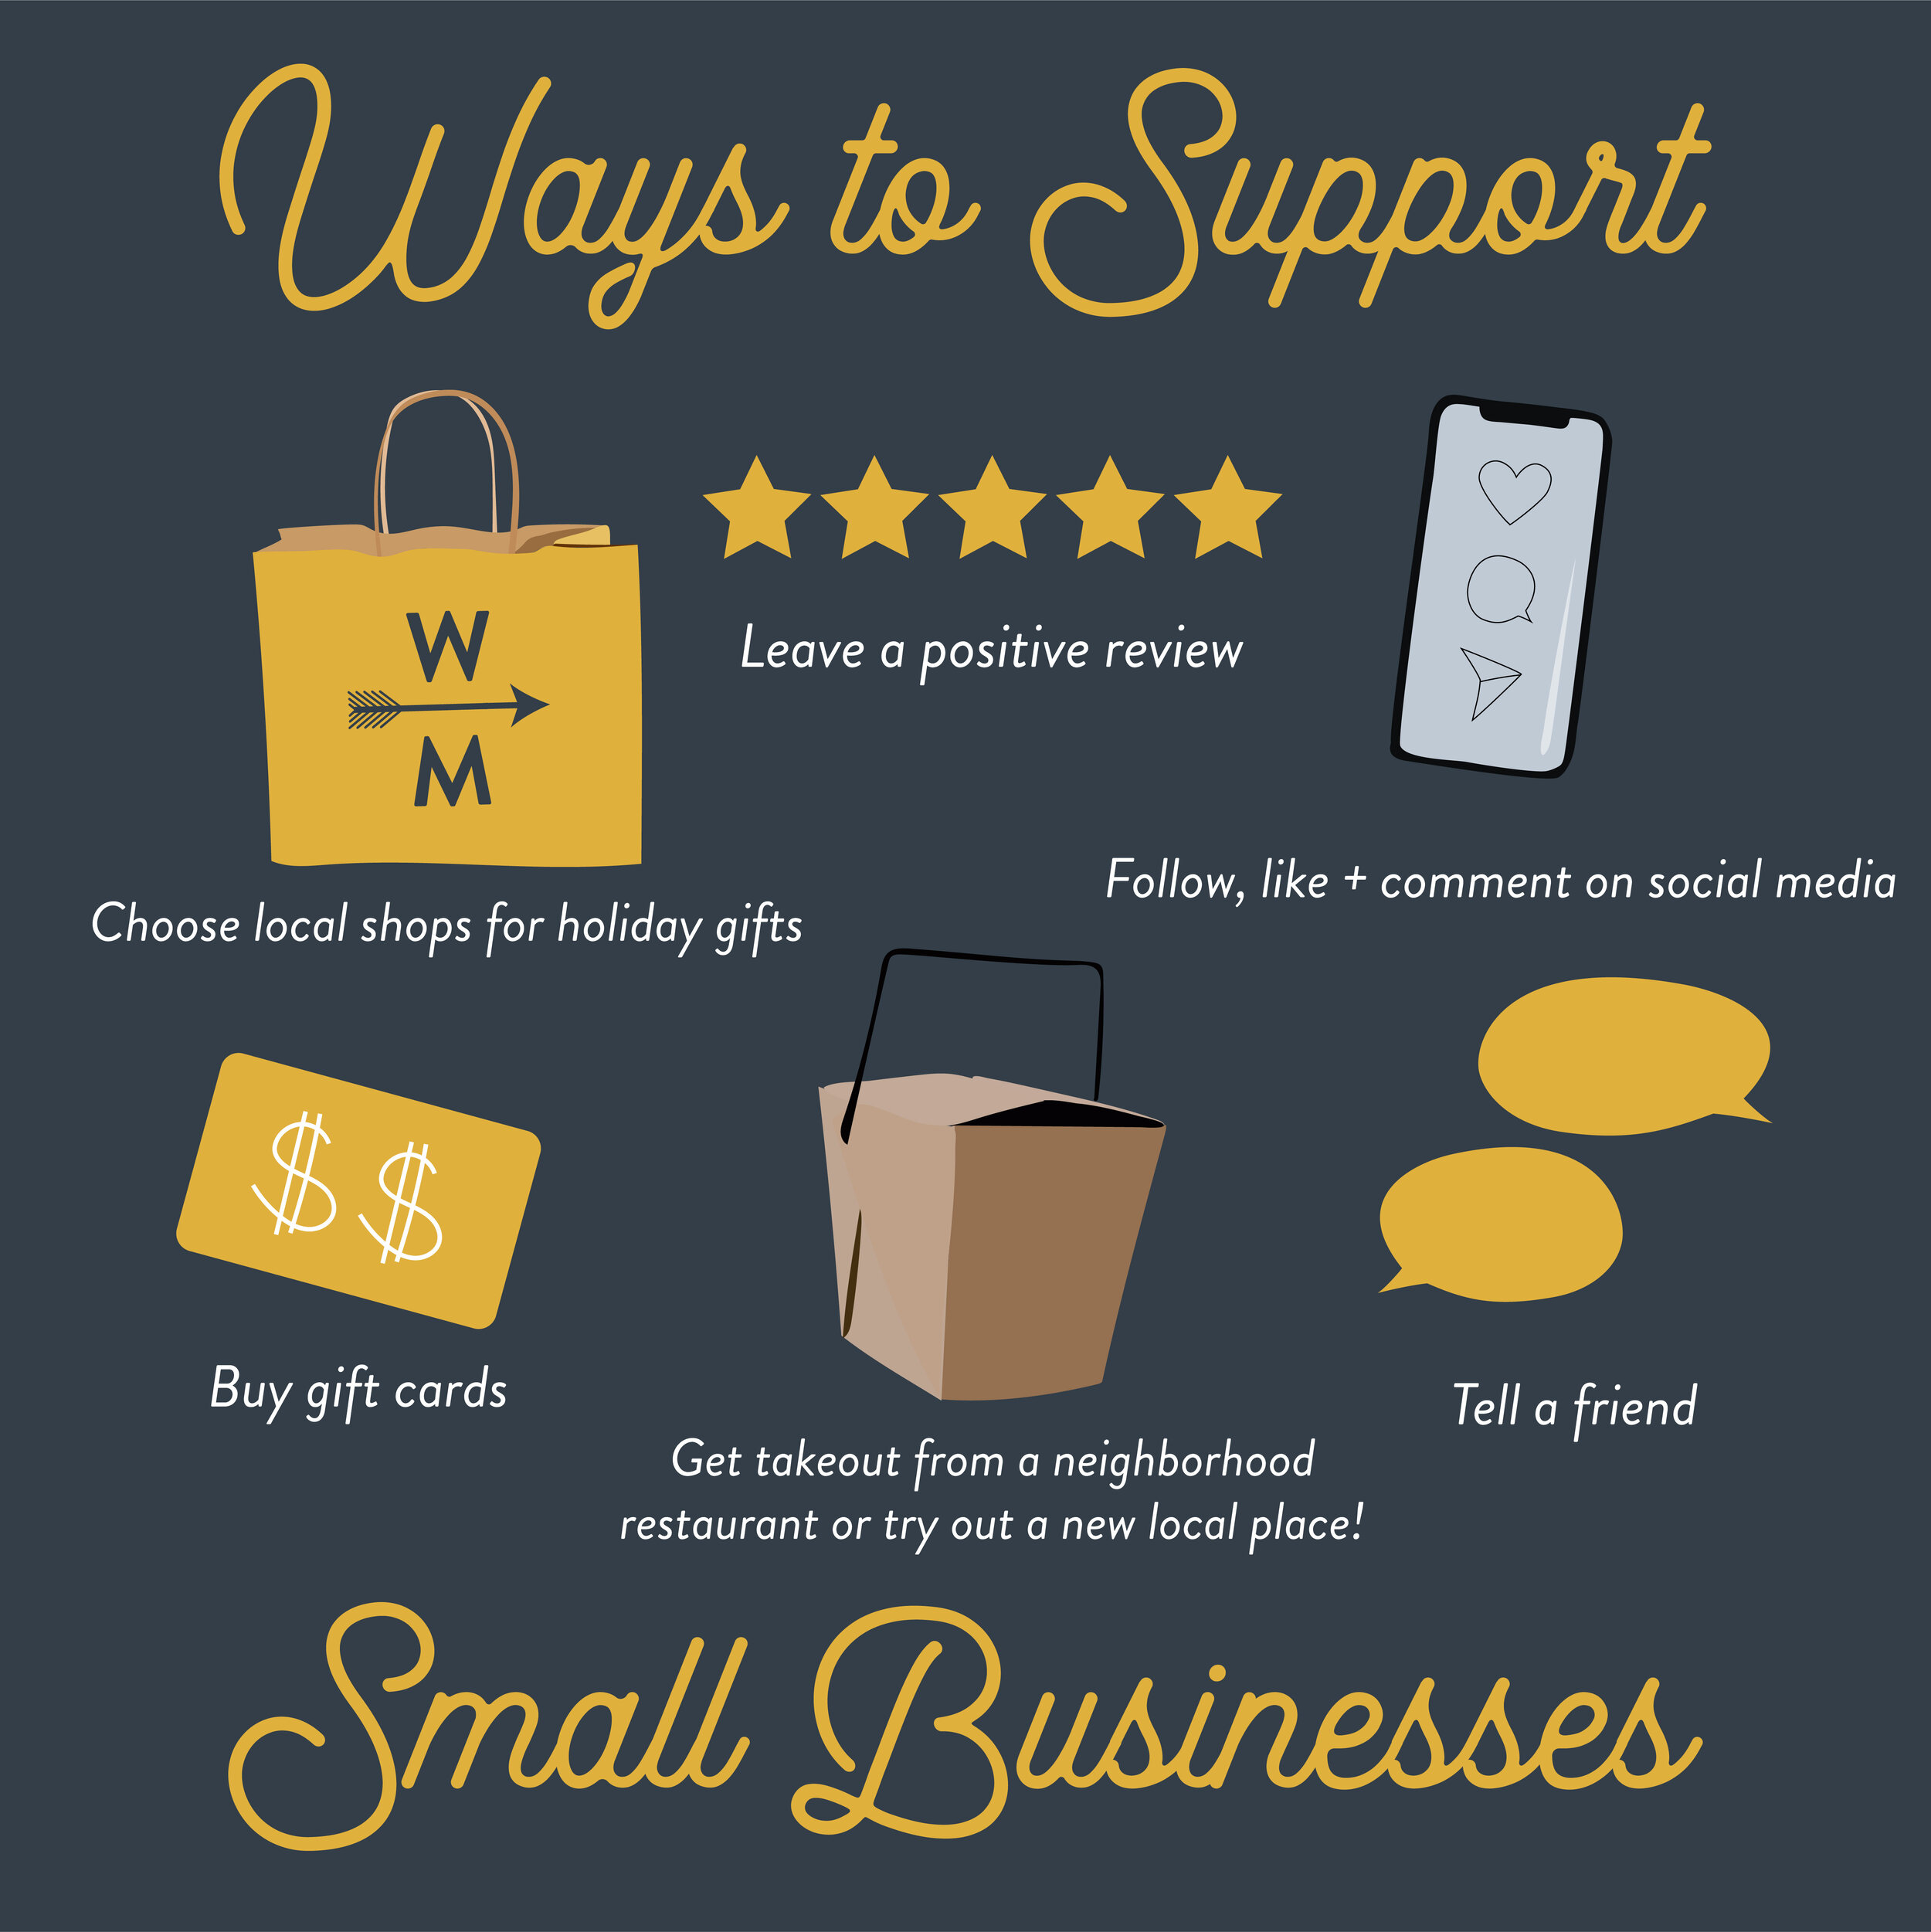 Small Business Campaign-07.jpg